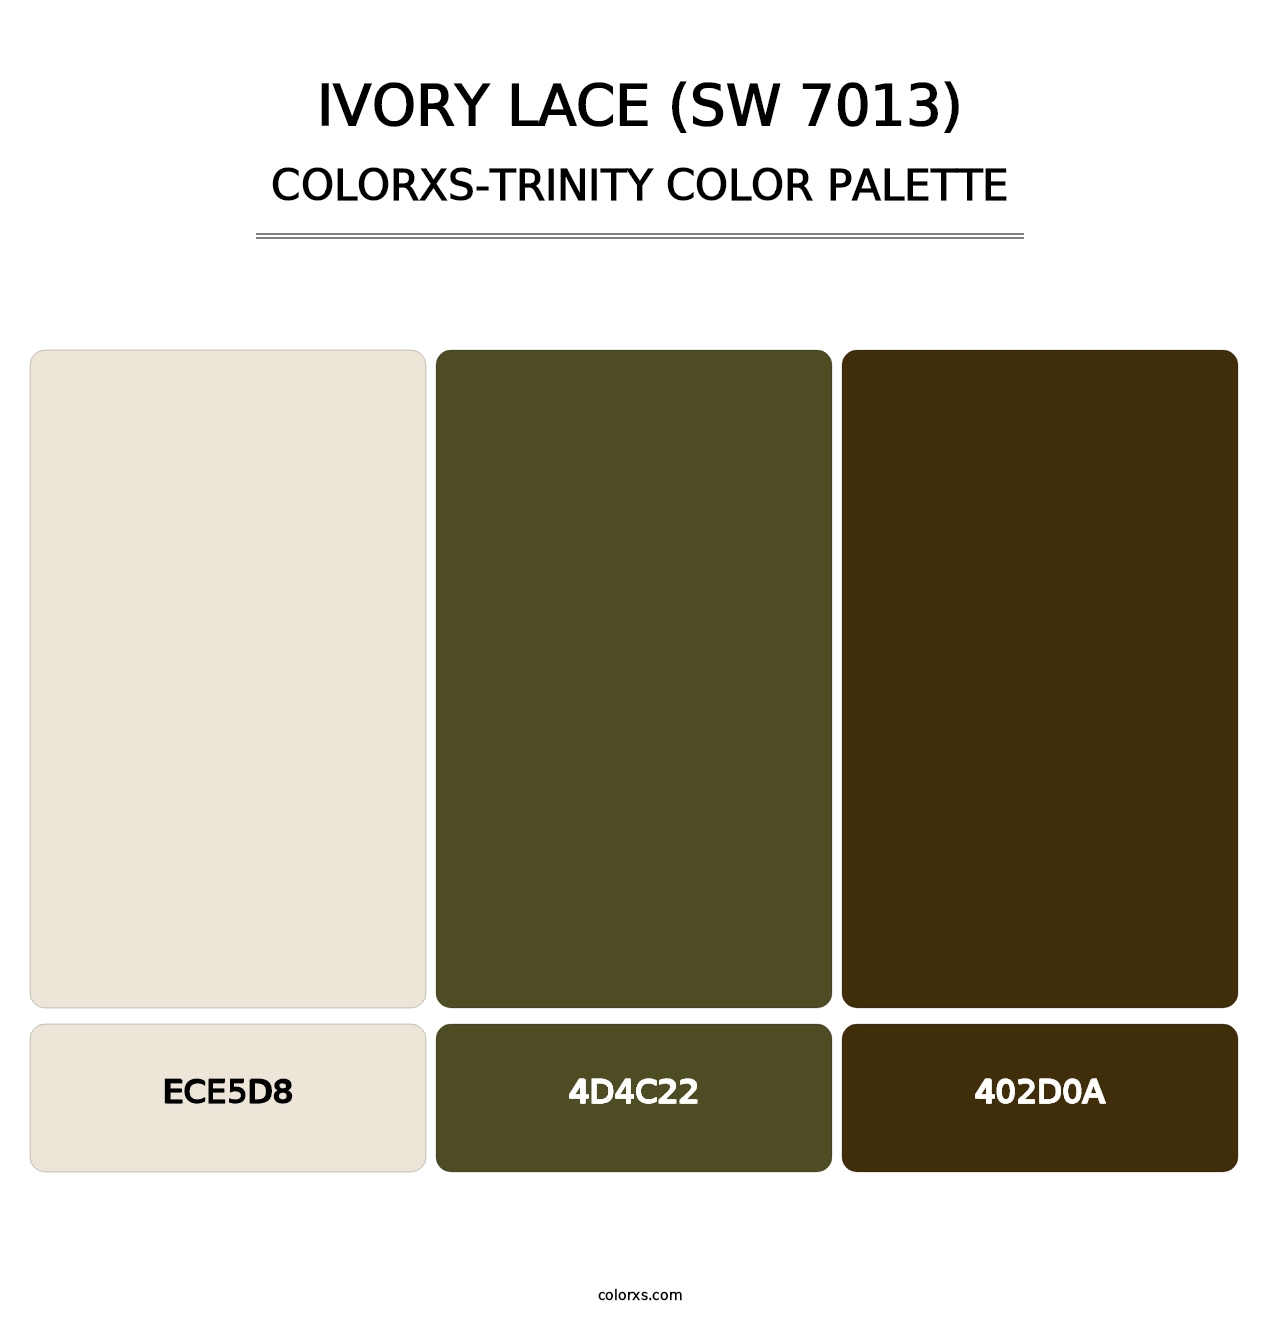 Ivory Lace (SW 7013) - Colorxs Trinity Palette